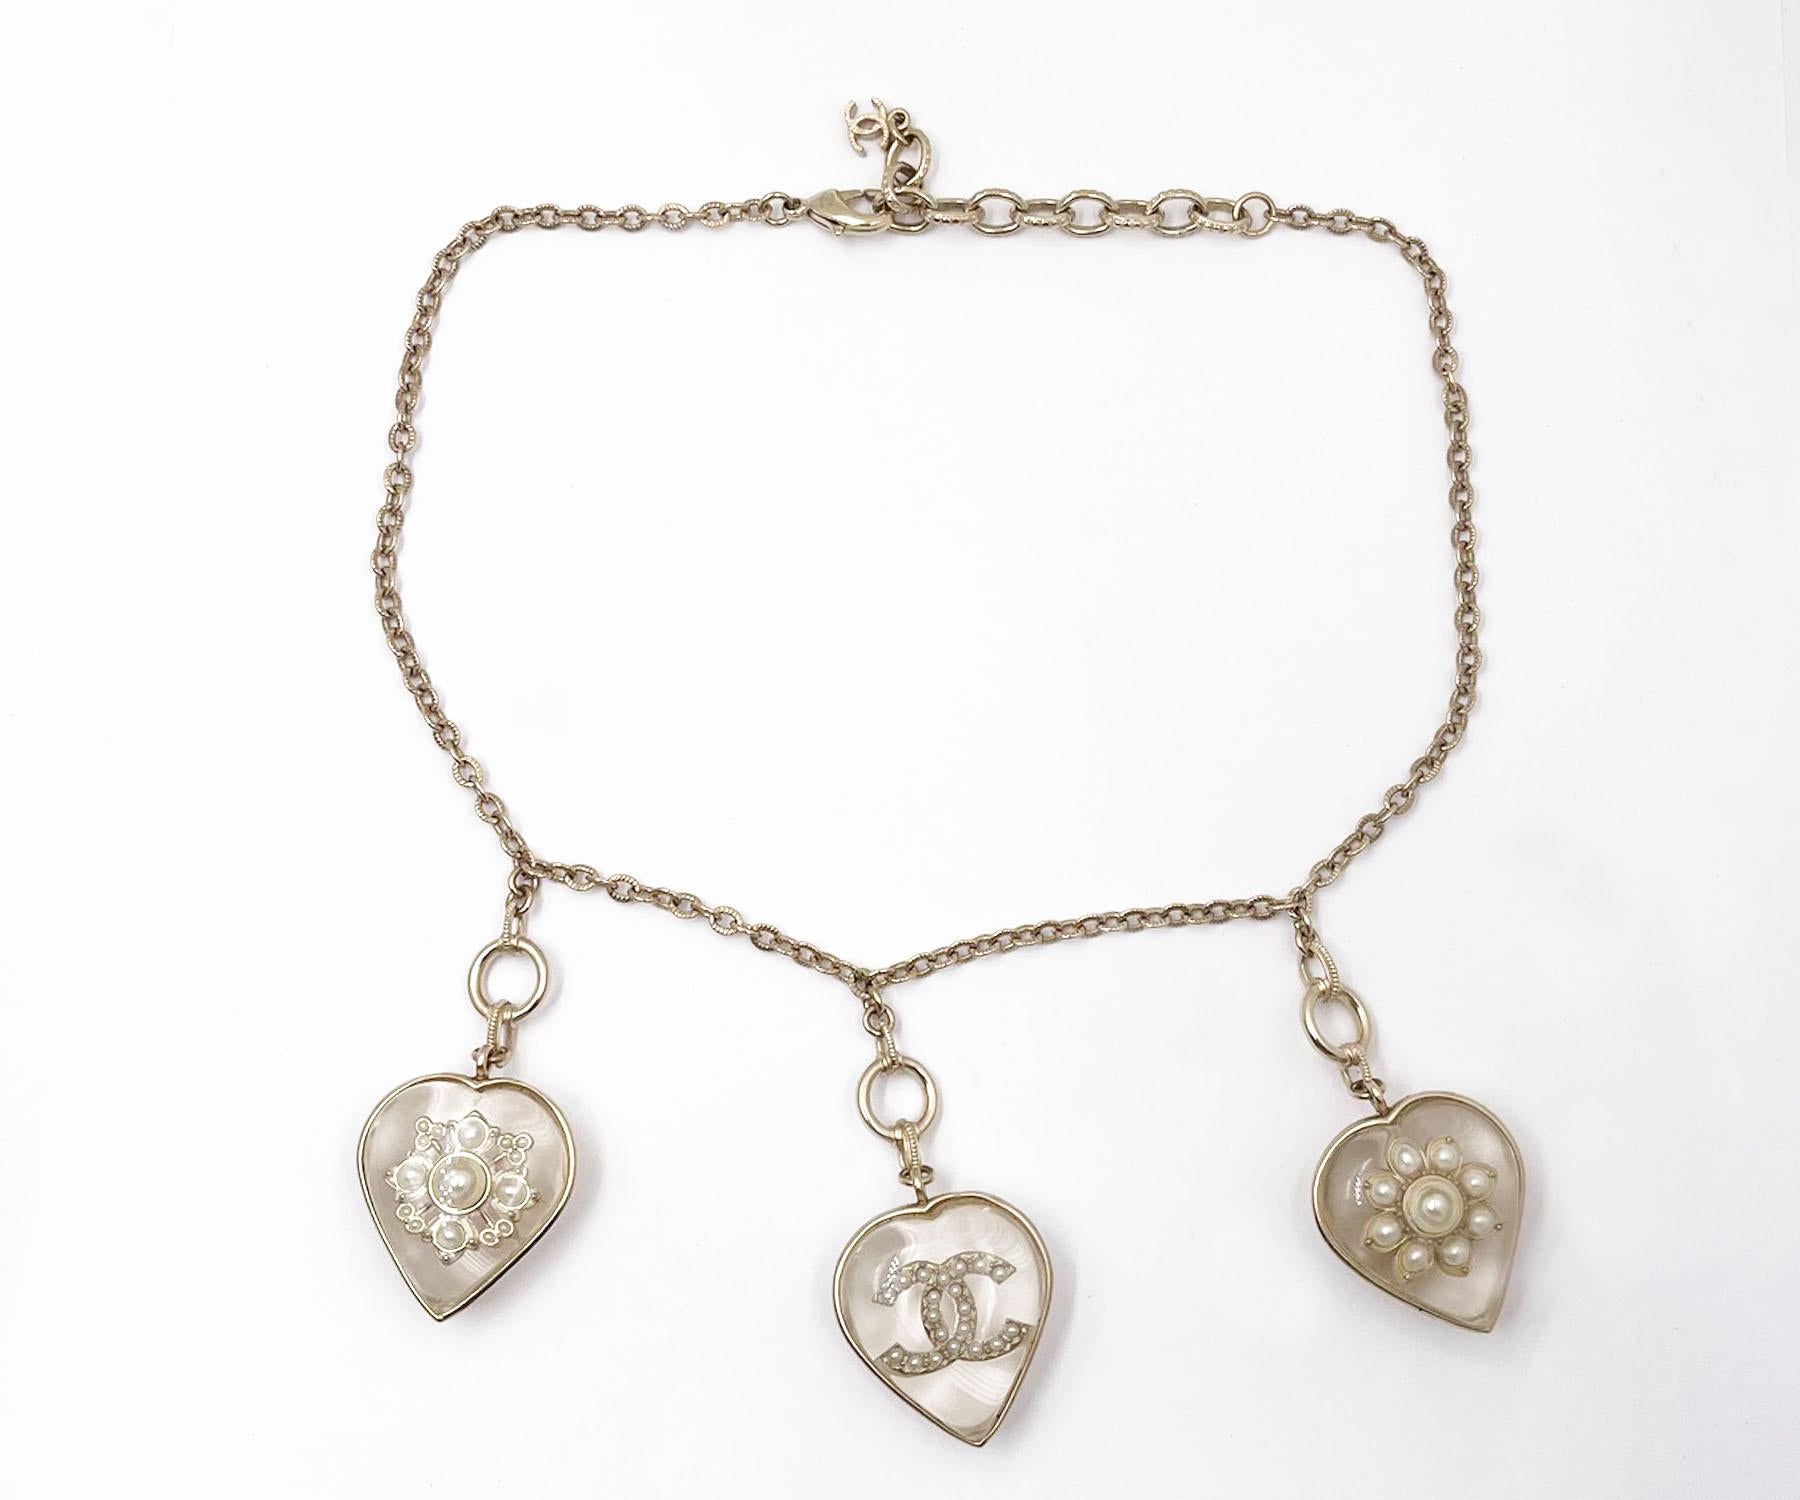 Chanel Gold CC Flower Heart Charm Necklace

*Marked 16
*Made in France
*Comes with the original box and dustbag

-It is approximately 34